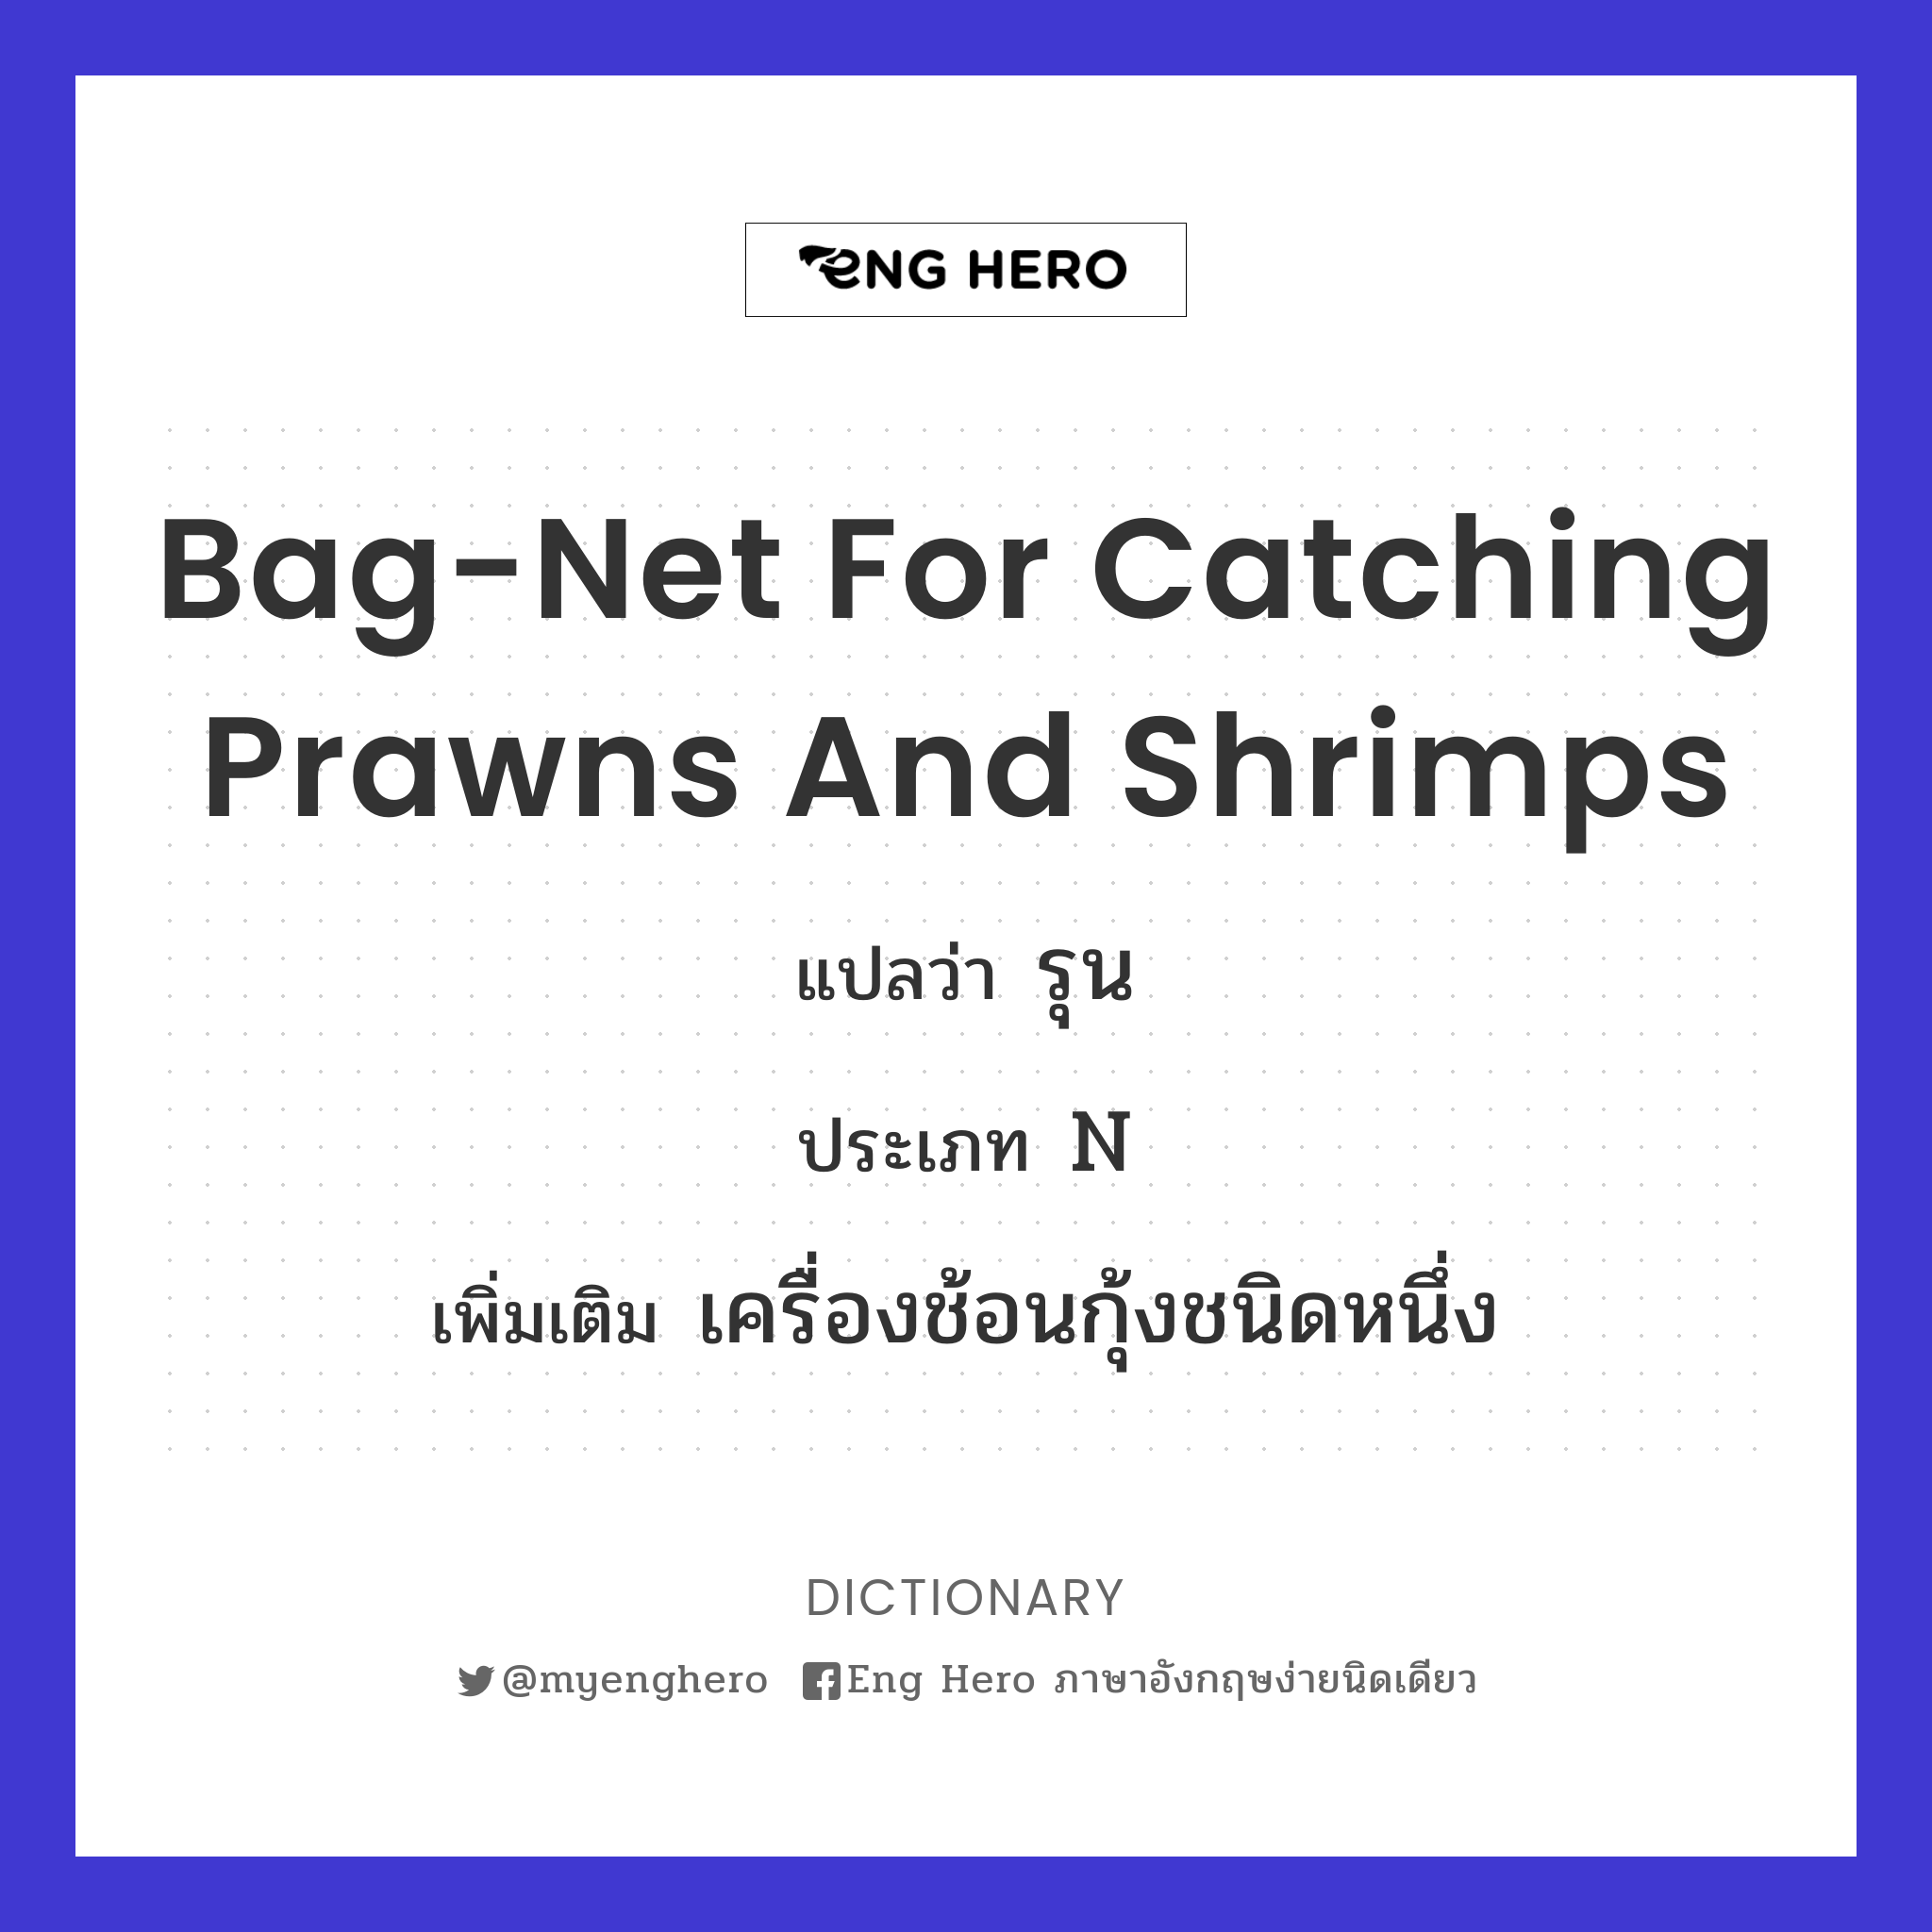 bag-net for catching prawns and shrimps